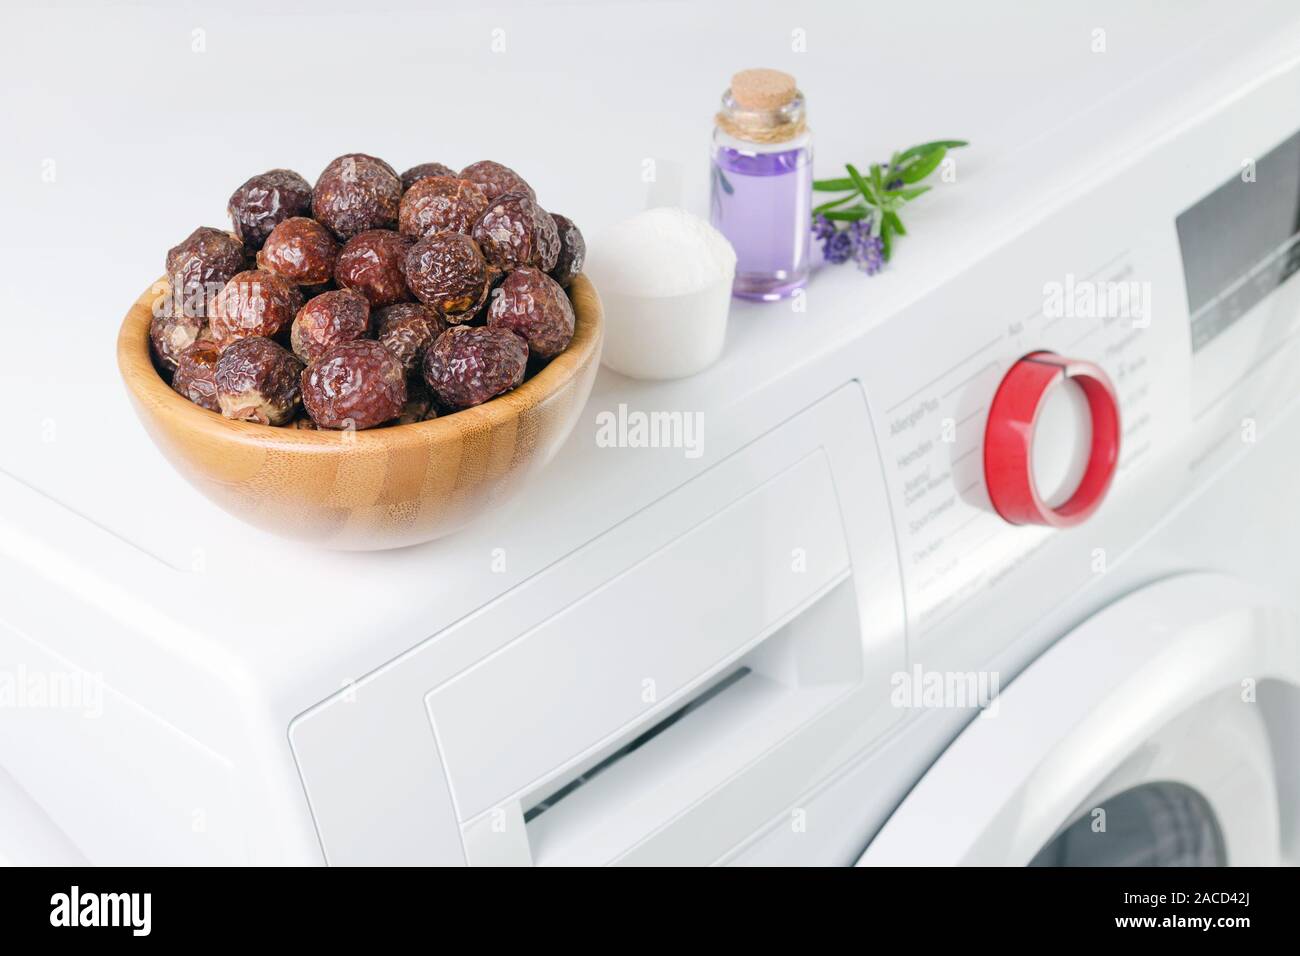 soap nuts in a bowl on the washing machine and lavender oil, detergent powder, selective focus Stock Photo